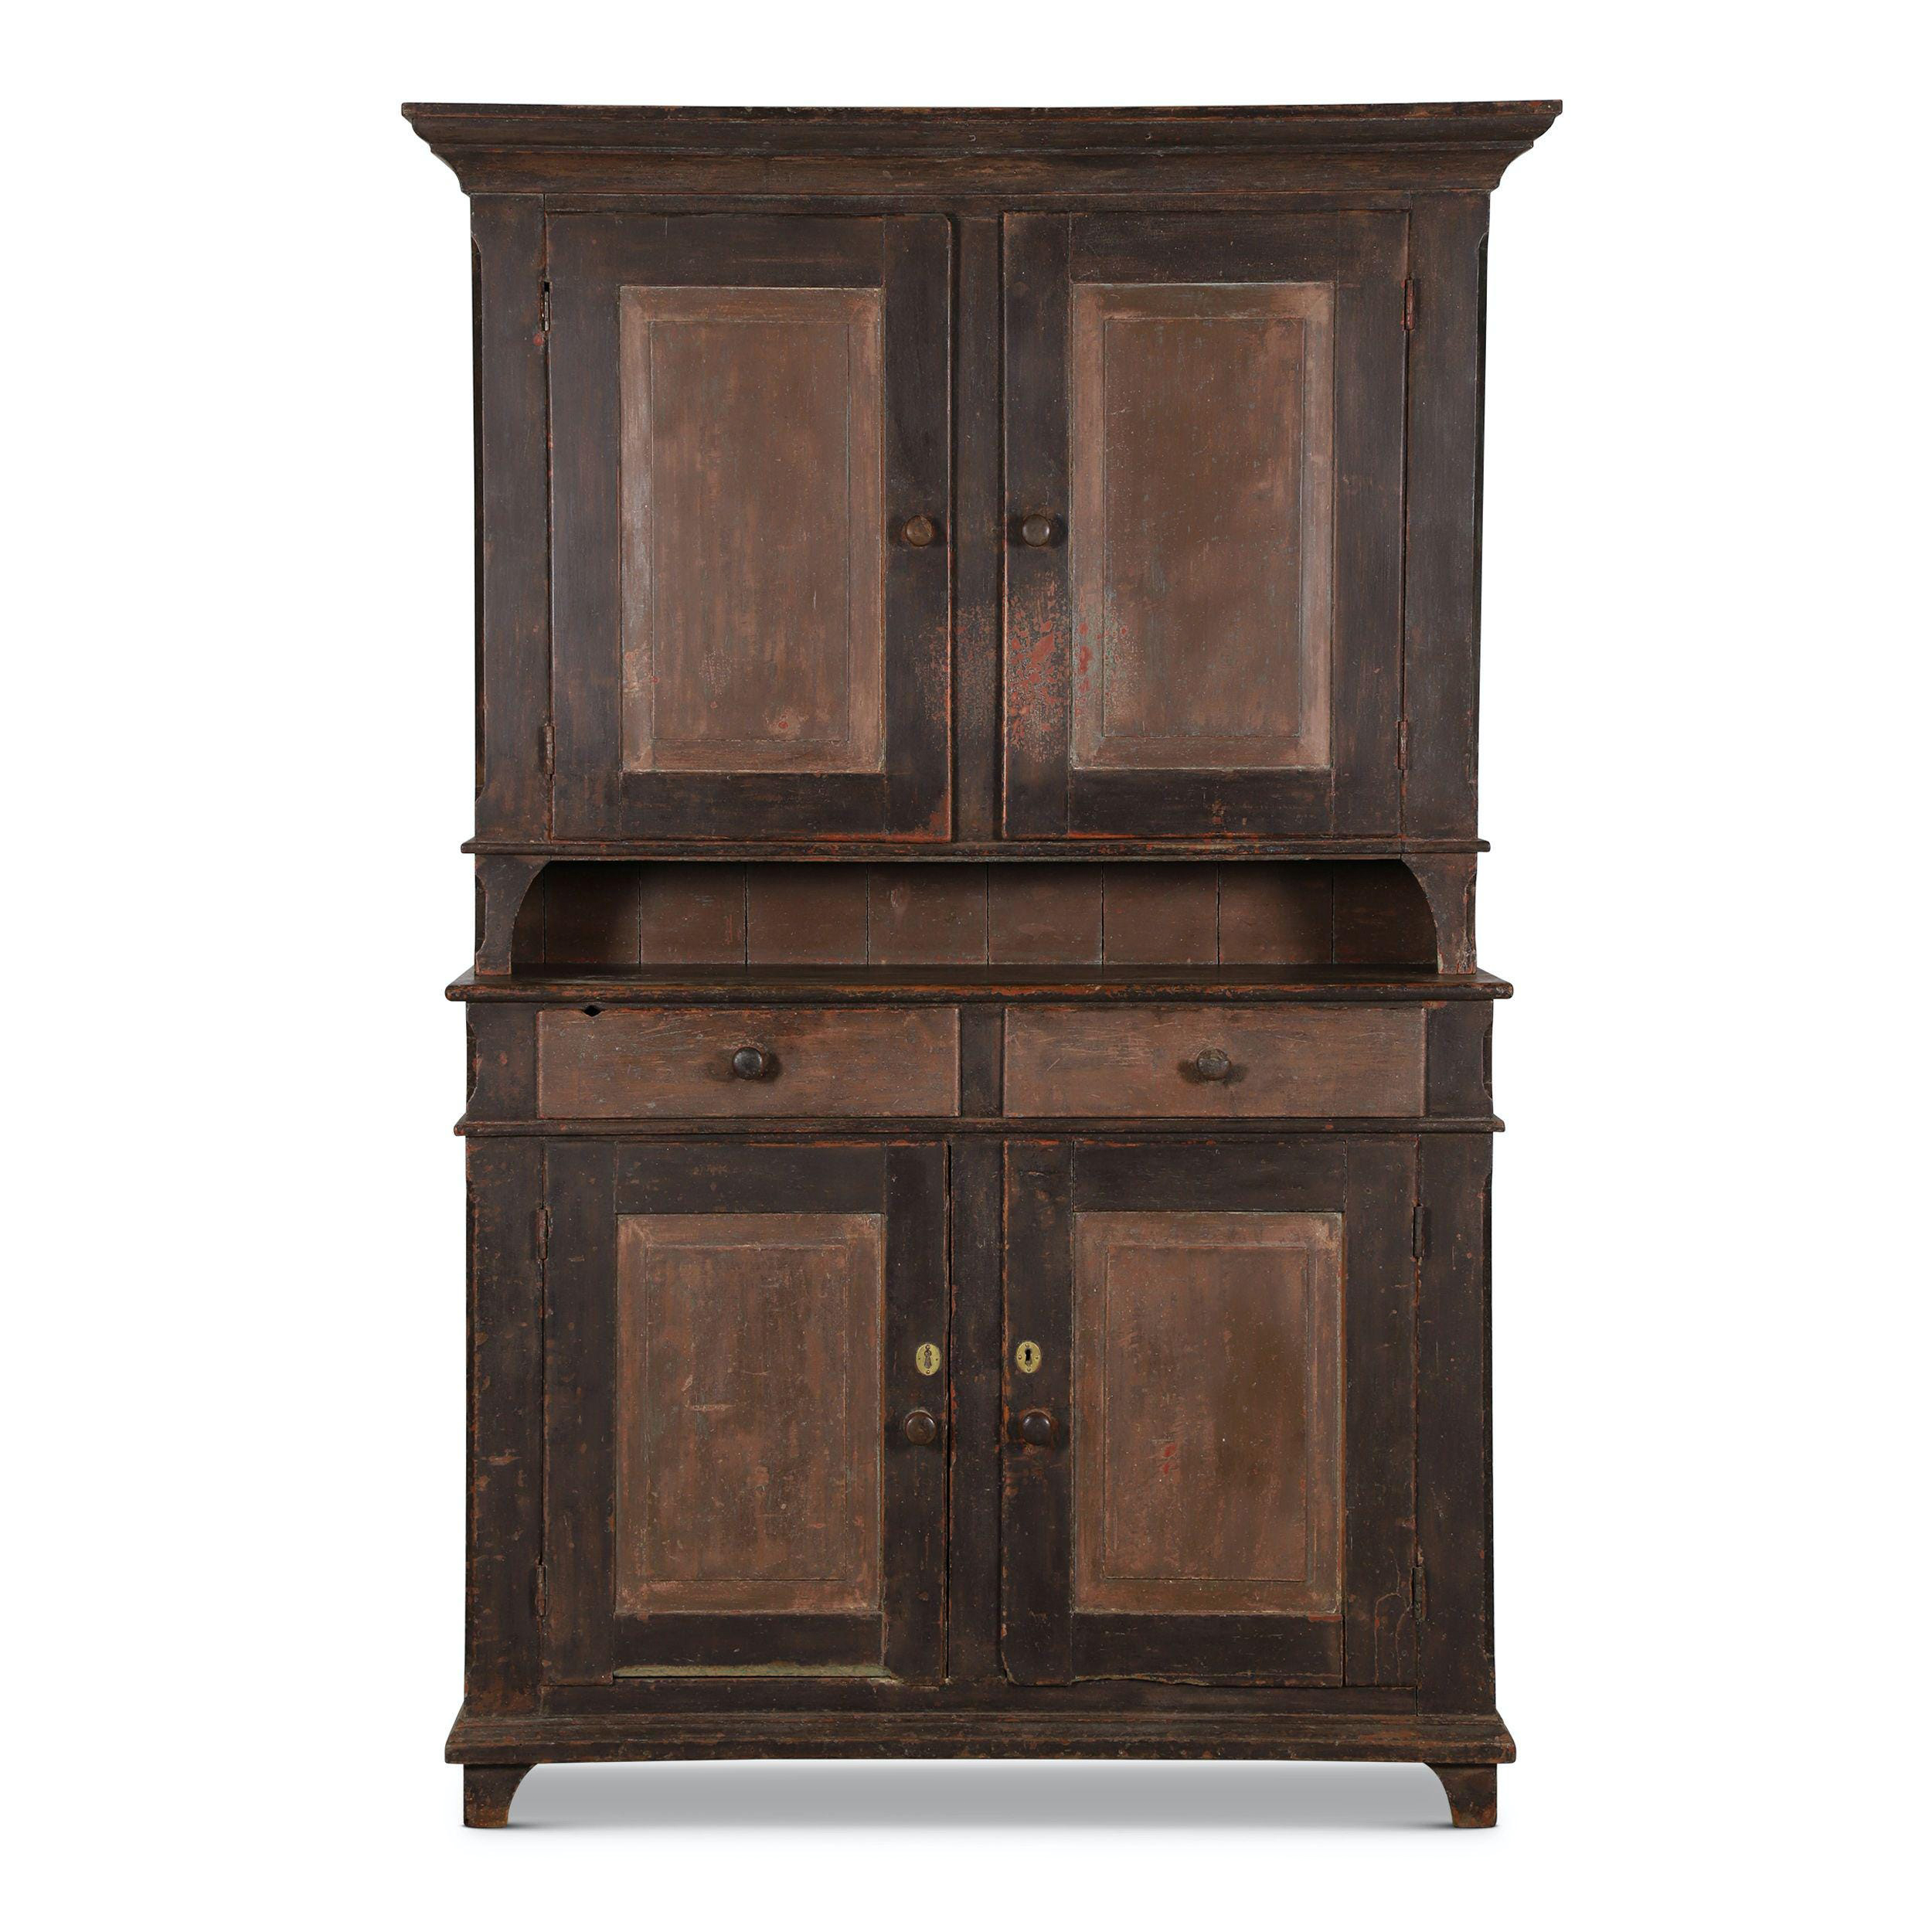 Waterloo County two-piece cupboard with original paint, 87 by 20in wide, estimated at $4,000-$6,000.